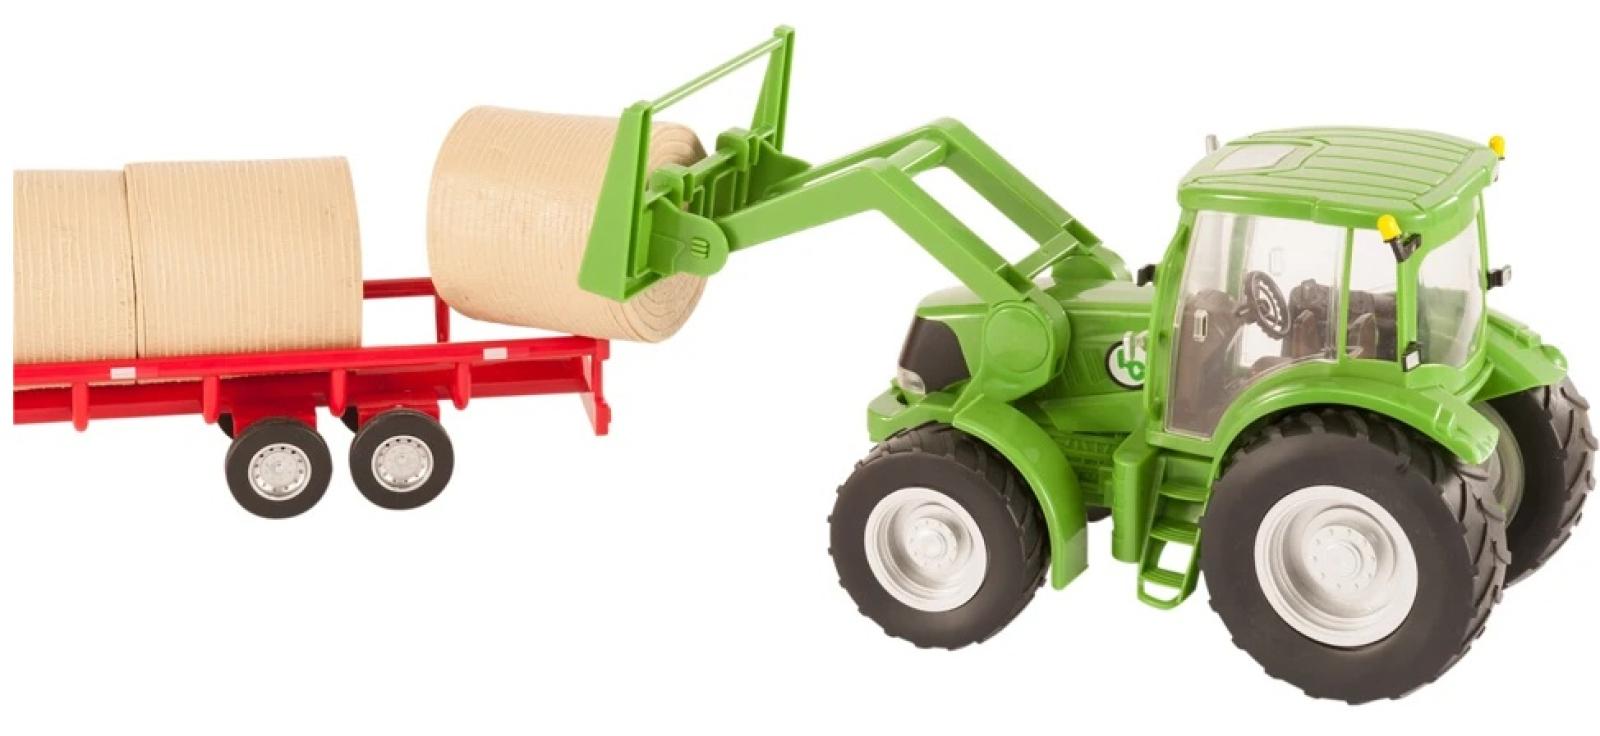 Big Country Farm Toys Tractor and Implements Loading Bales, Trailer Sold Separately